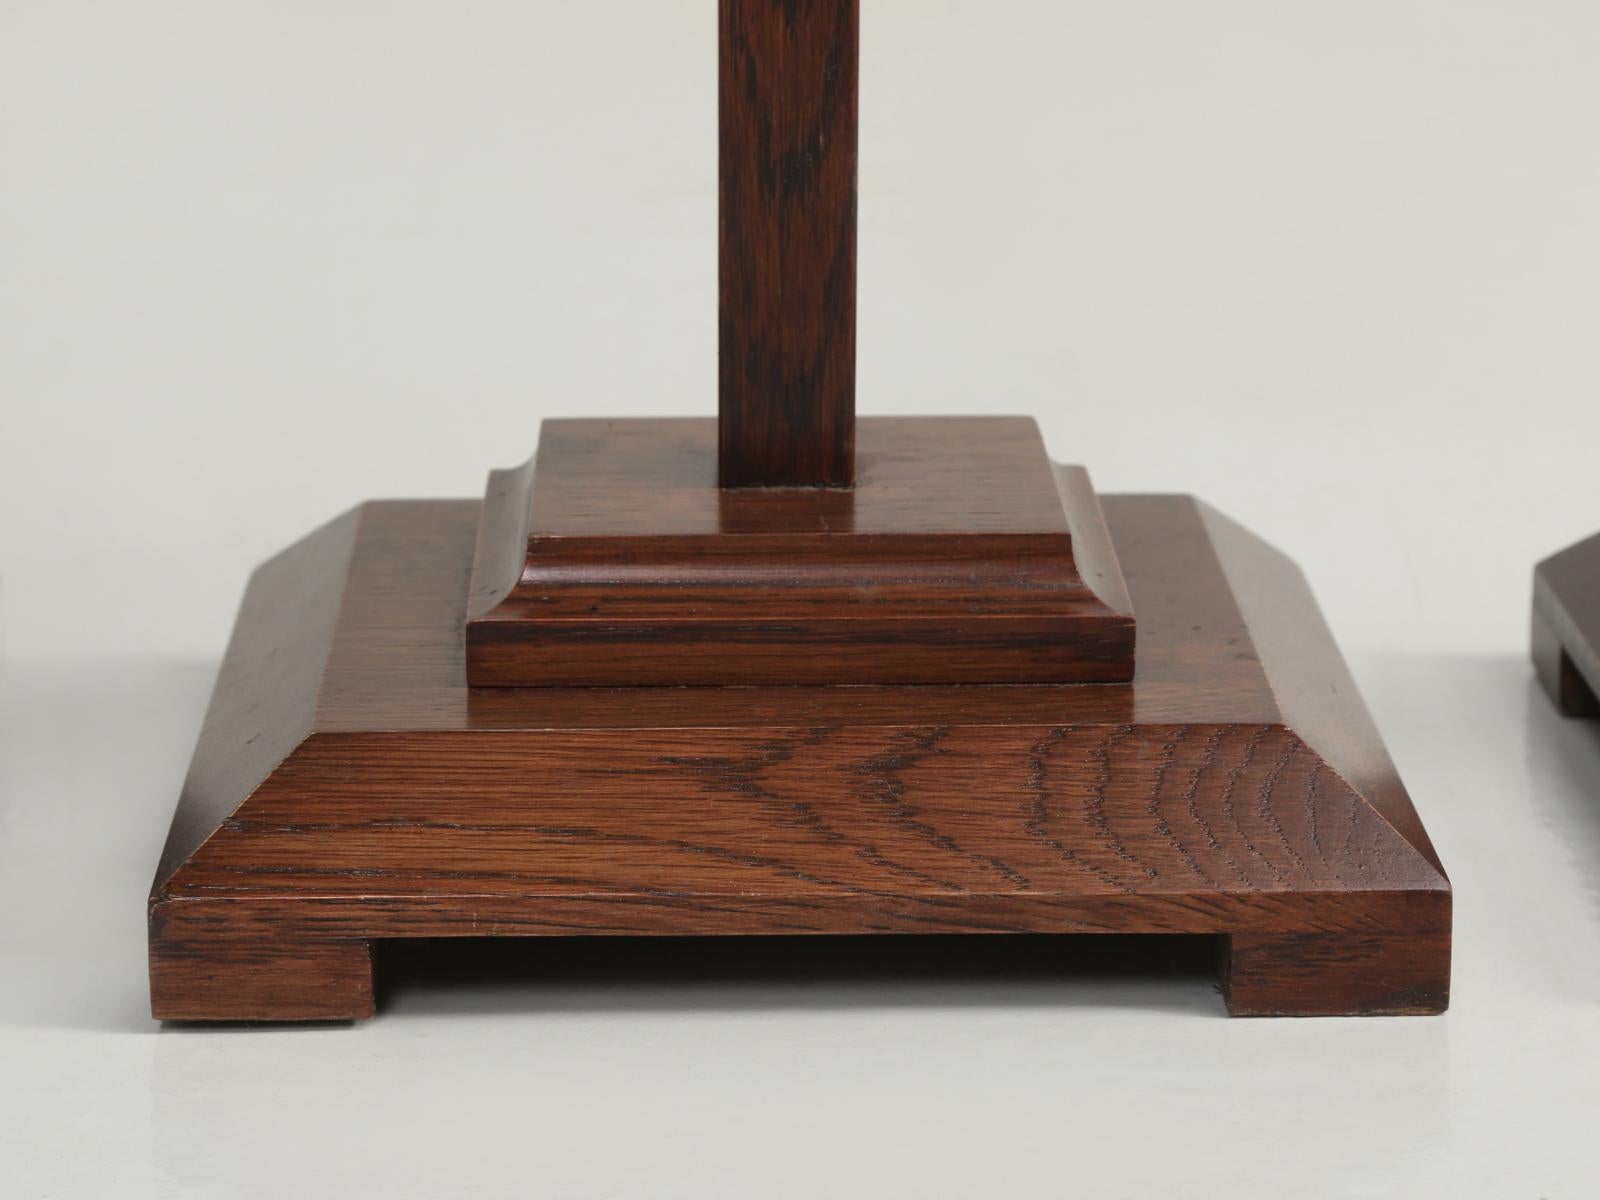 Set of '3' Hat Stands Made of White Oak with Weighted Bottoms for Stability For Sale 11